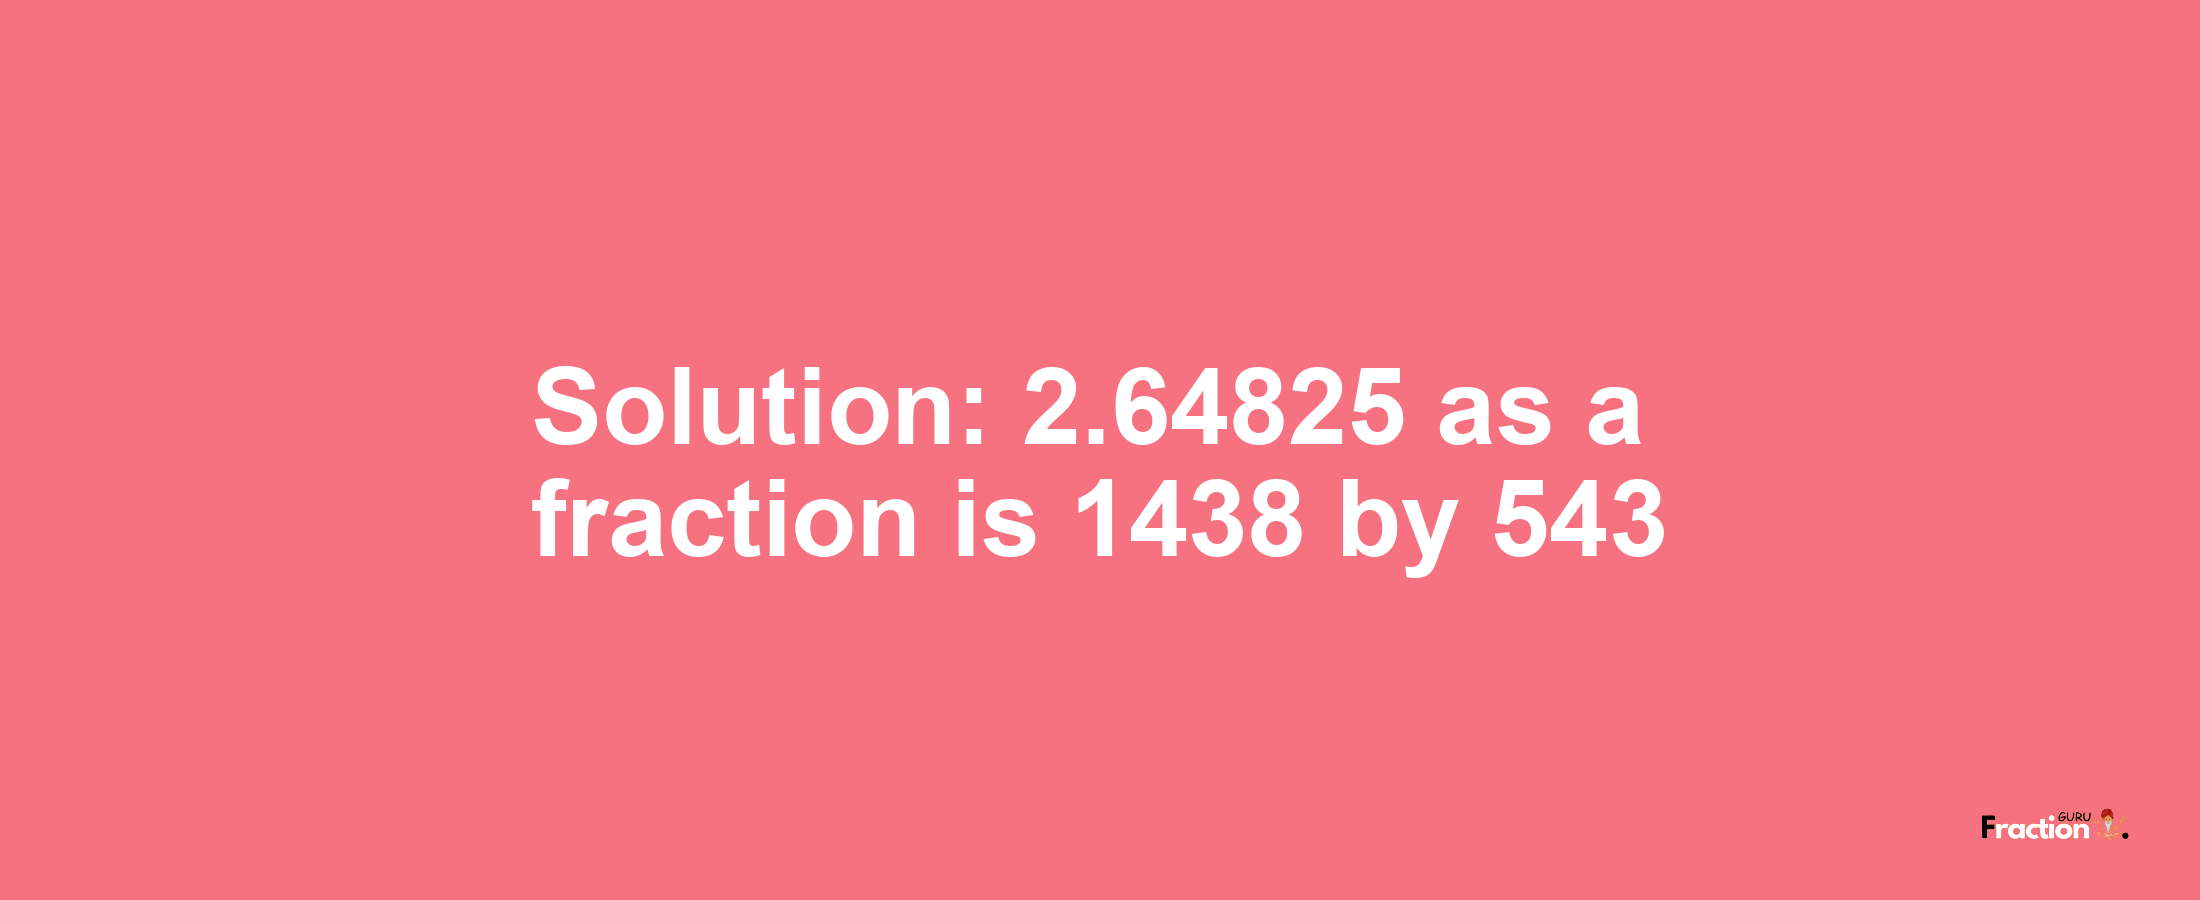 Solution:2.64825 as a fraction is 1438/543